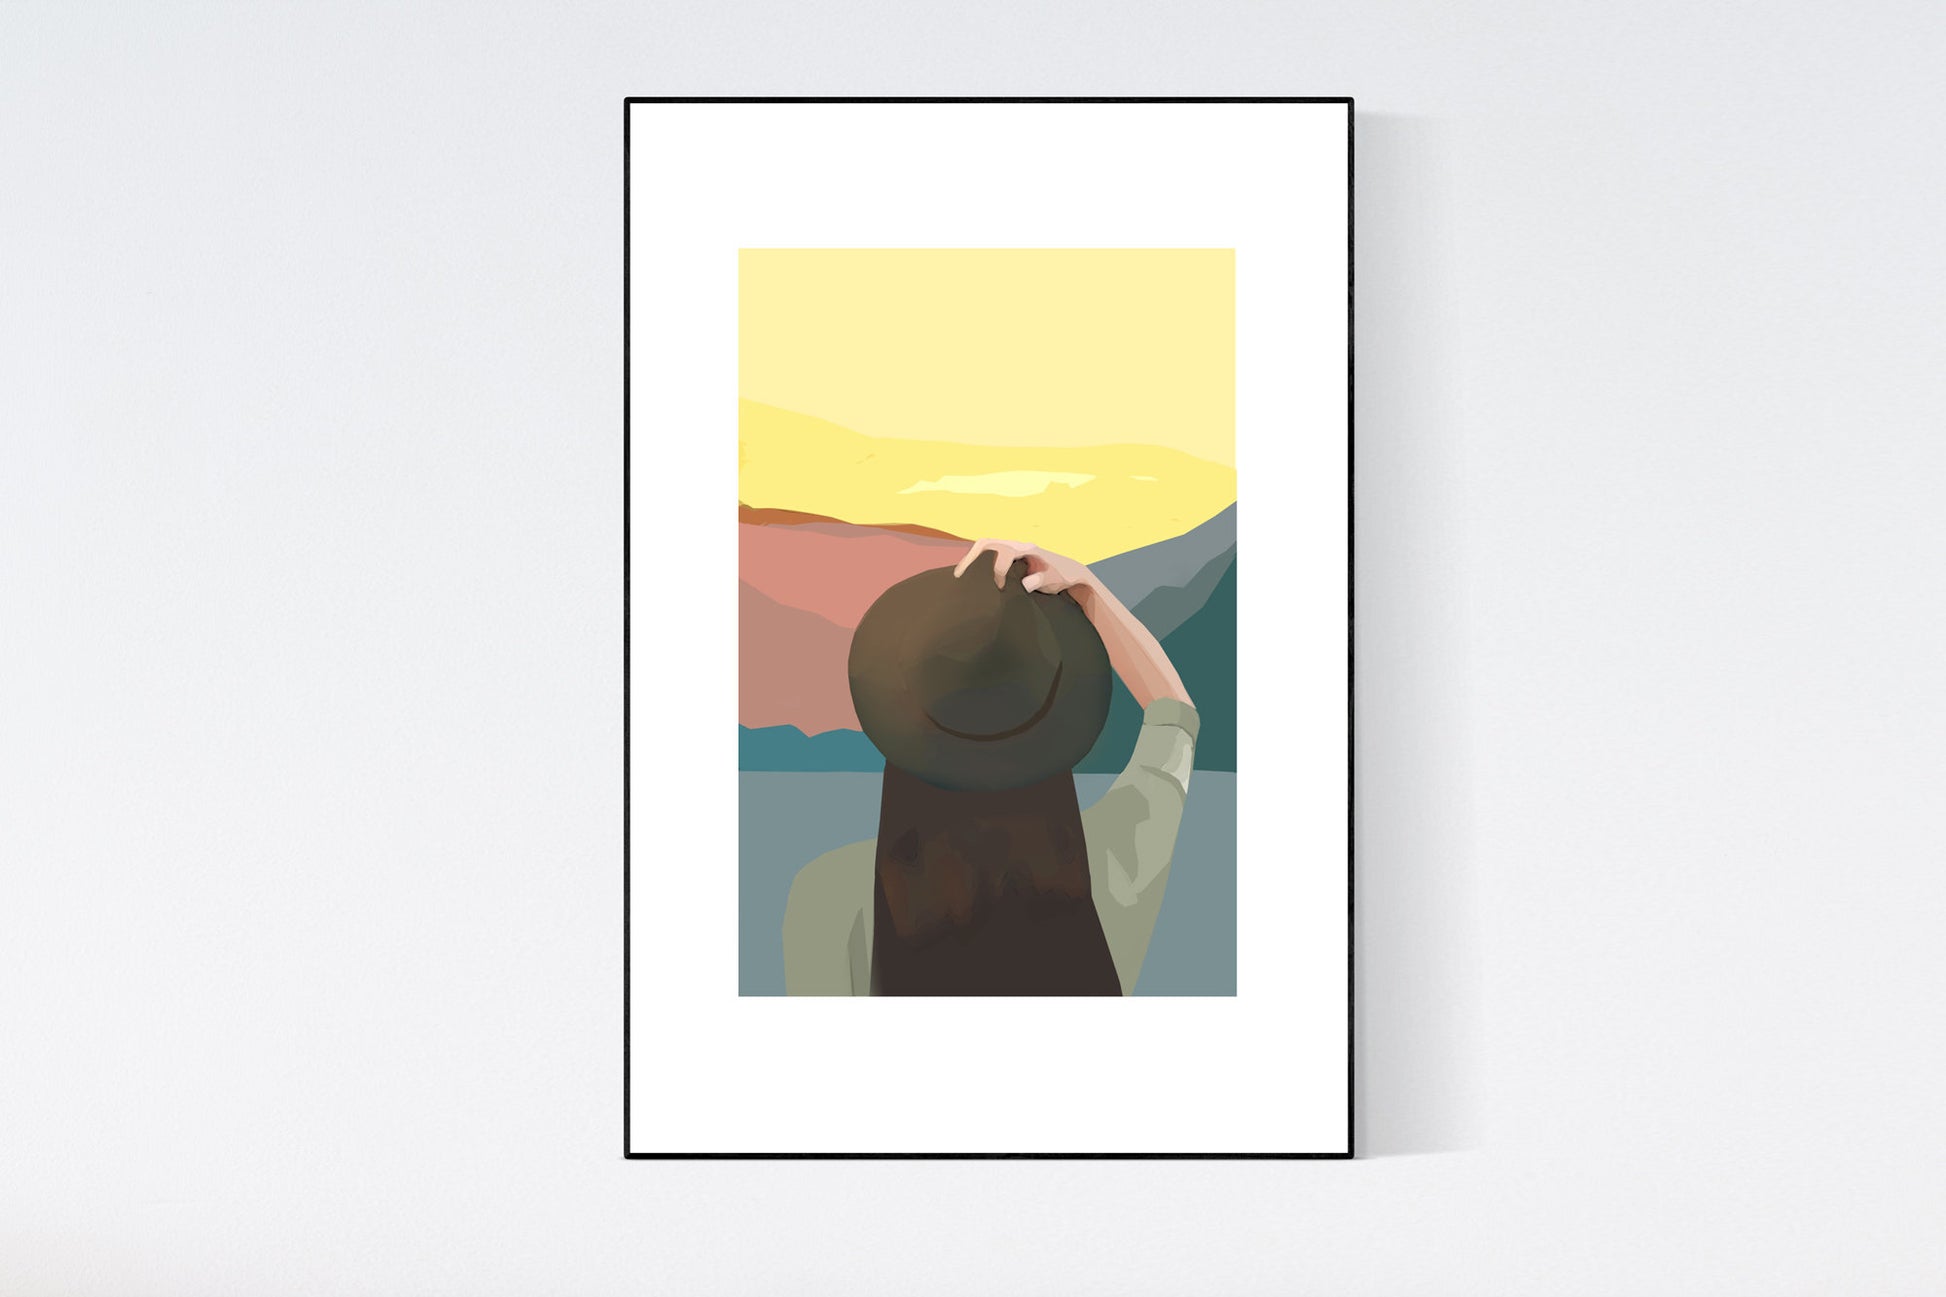 Illustration of Yosemite at sunset with woman overlooking mountains